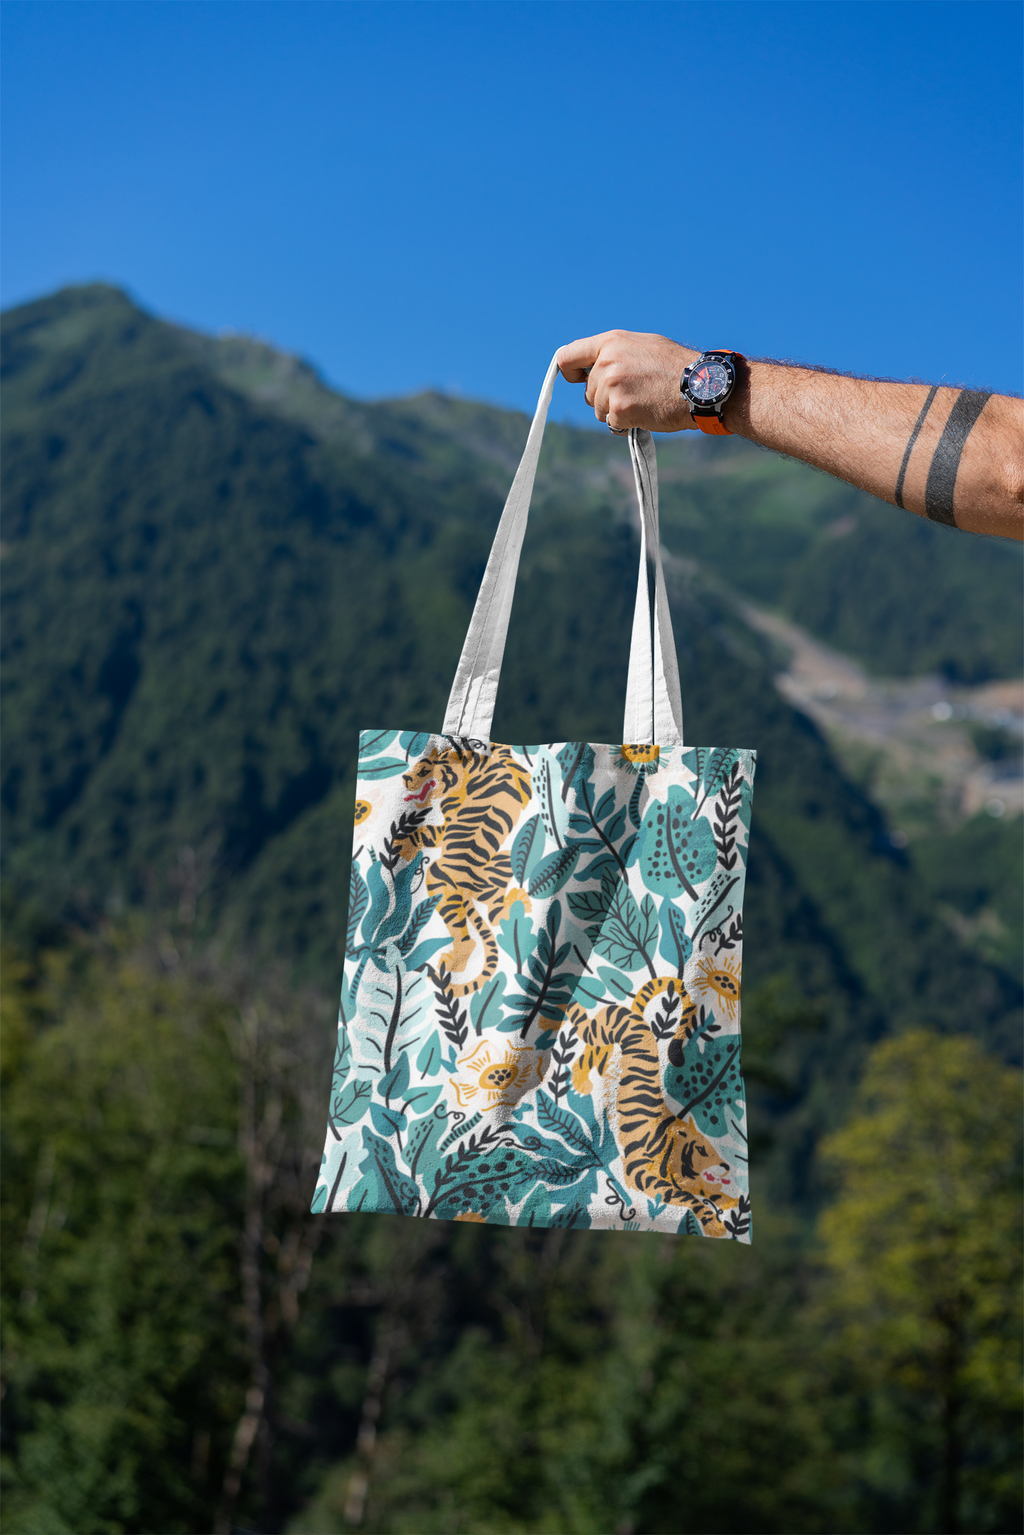 mockup-featuring-a-man-s-hand-holding-a-tote-bag-against-a-natural-scenery-3131-el1 (2).png